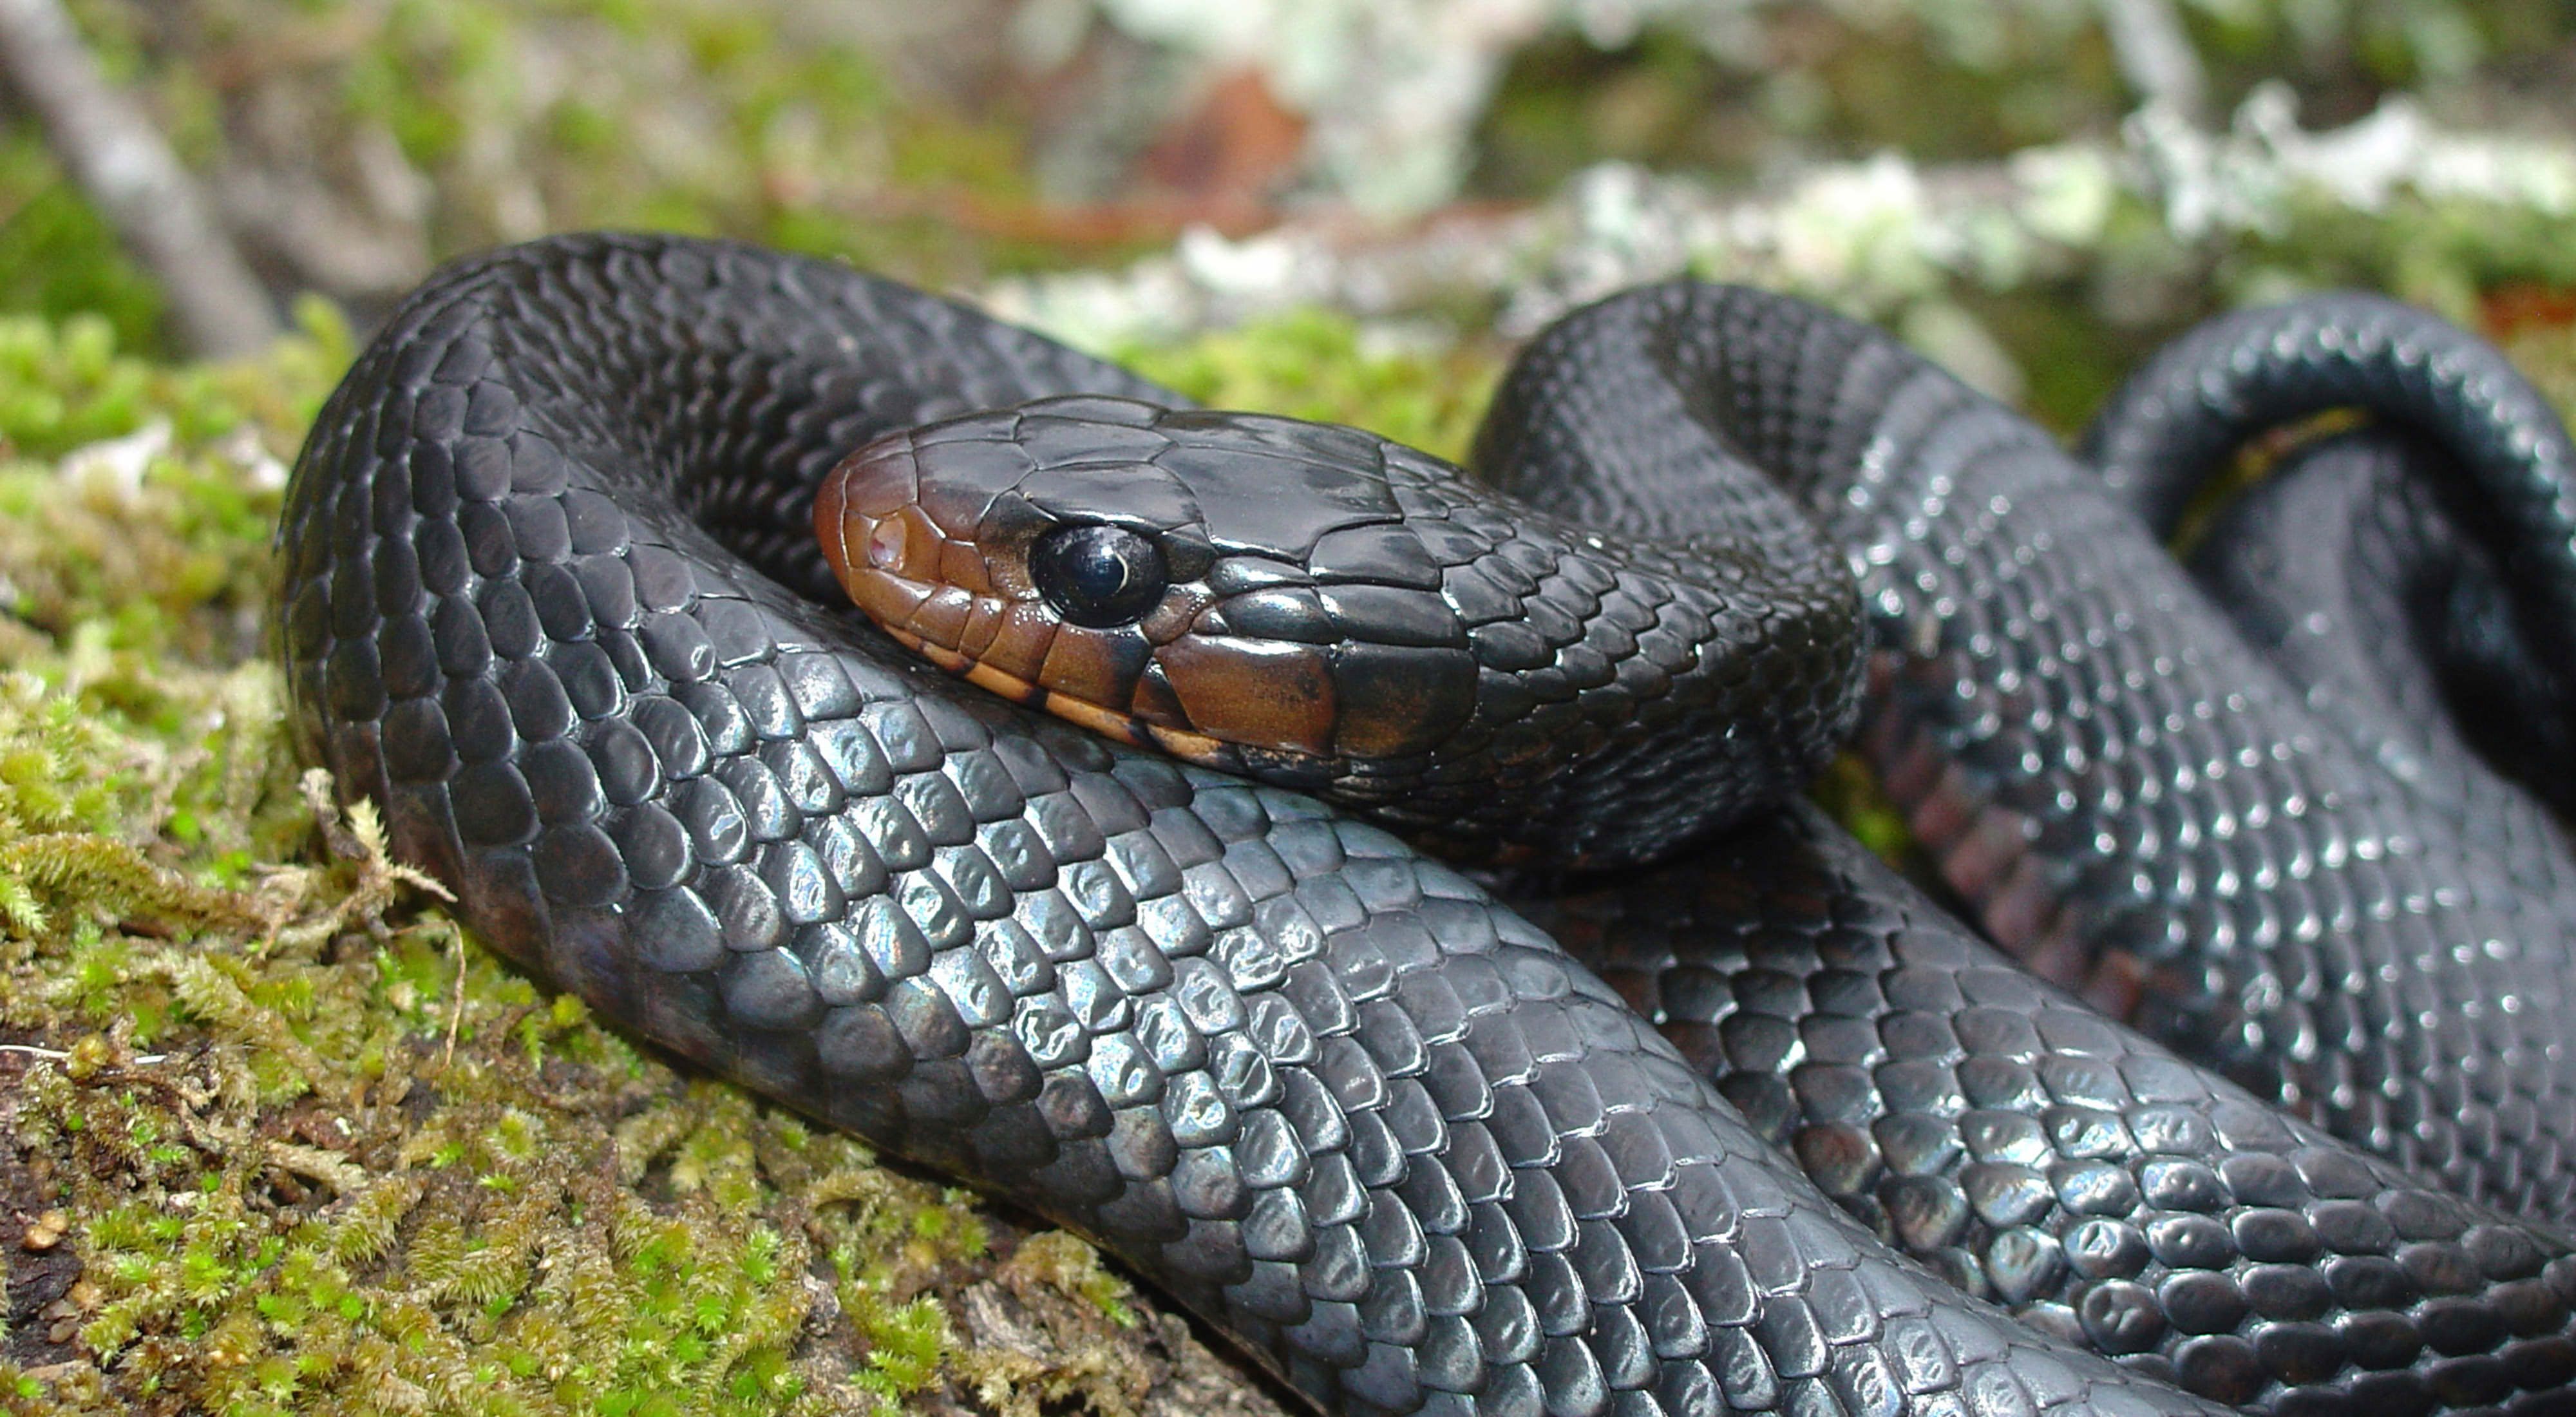 Closeup of an eastern indigo snake coiled on the ground.